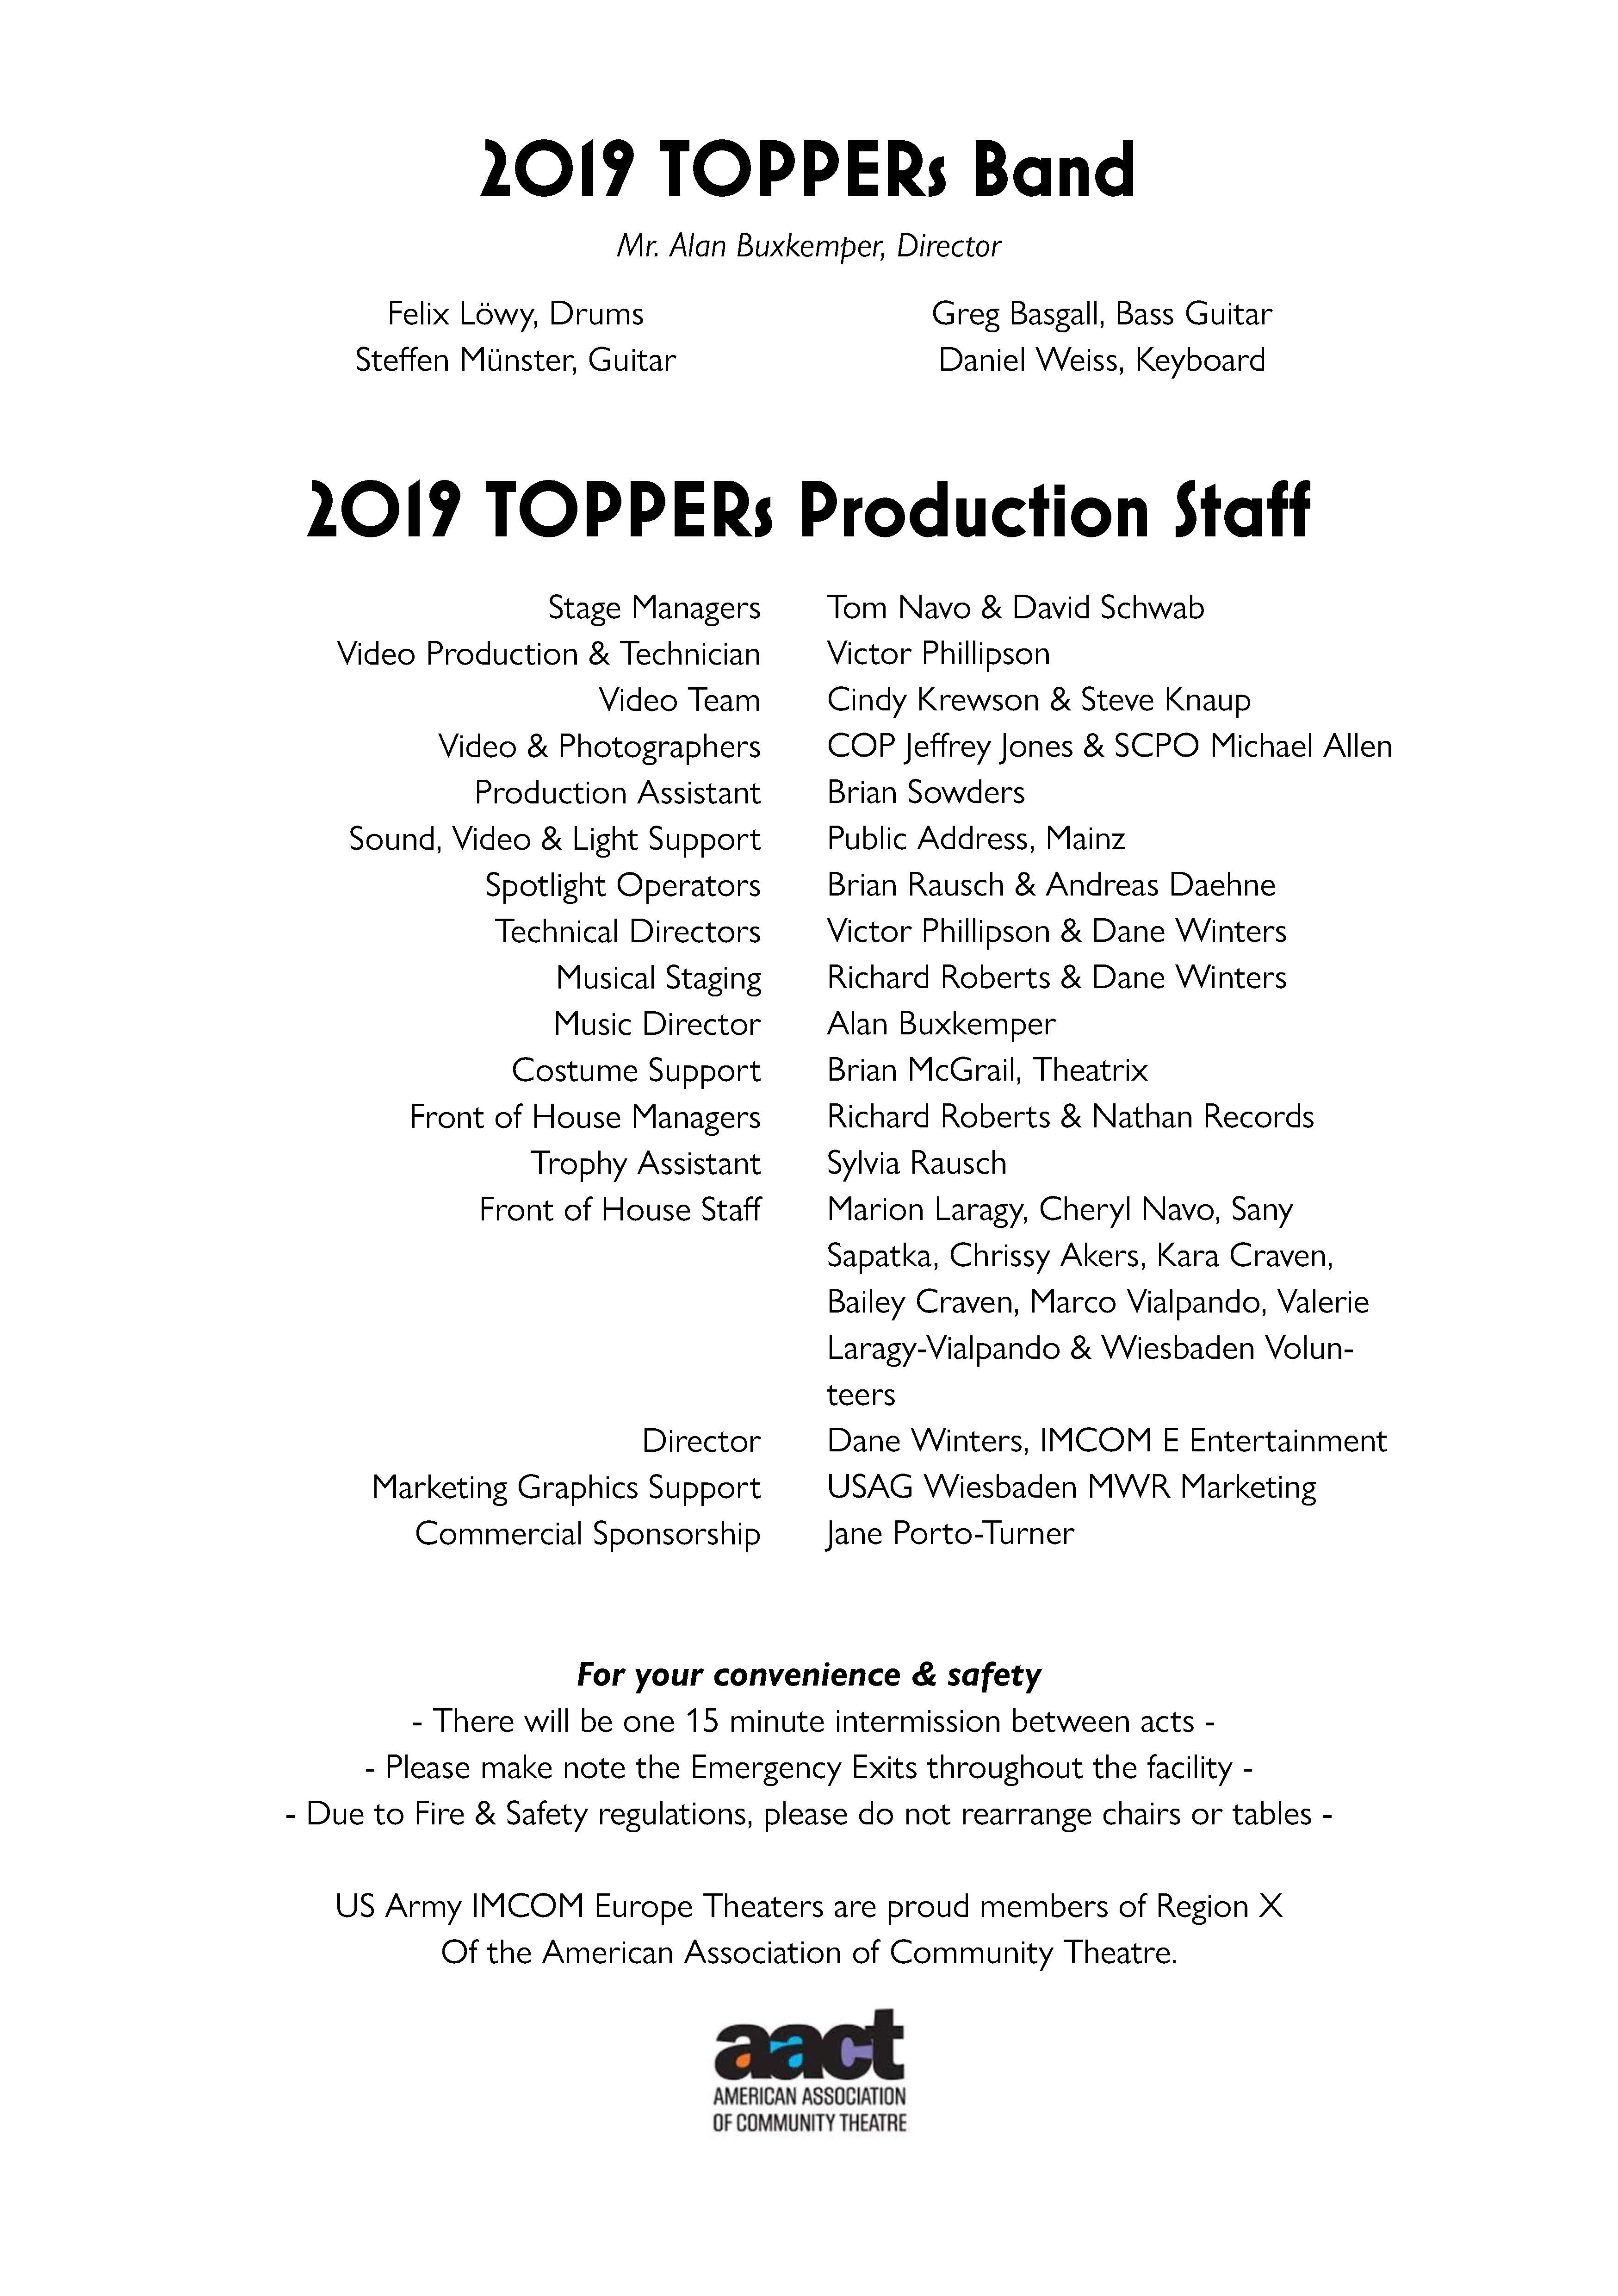 crd_special_toppers_program_a5_Page_2.jpg